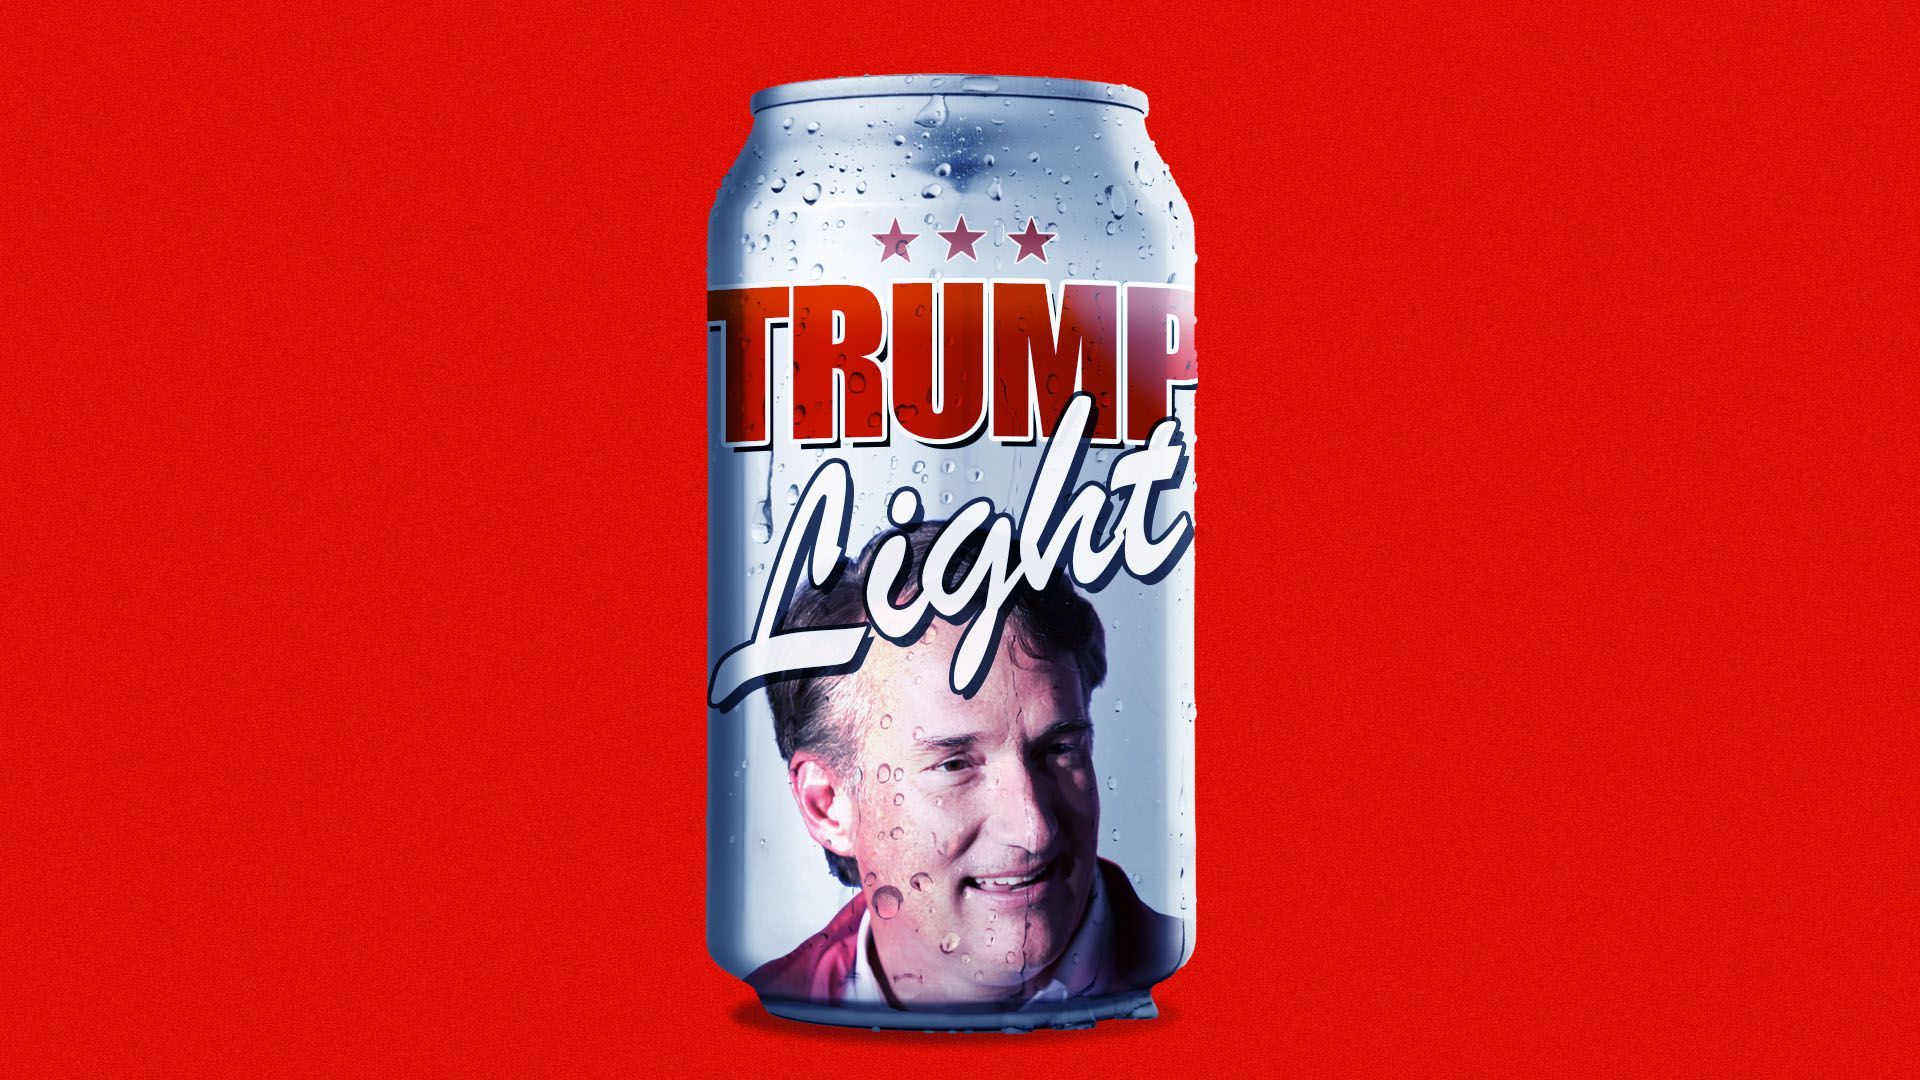 Illustration of a beer can that reads "Trump Light" and features an image of Virginia Republican gubernatorial candidate Glenn Youngkin